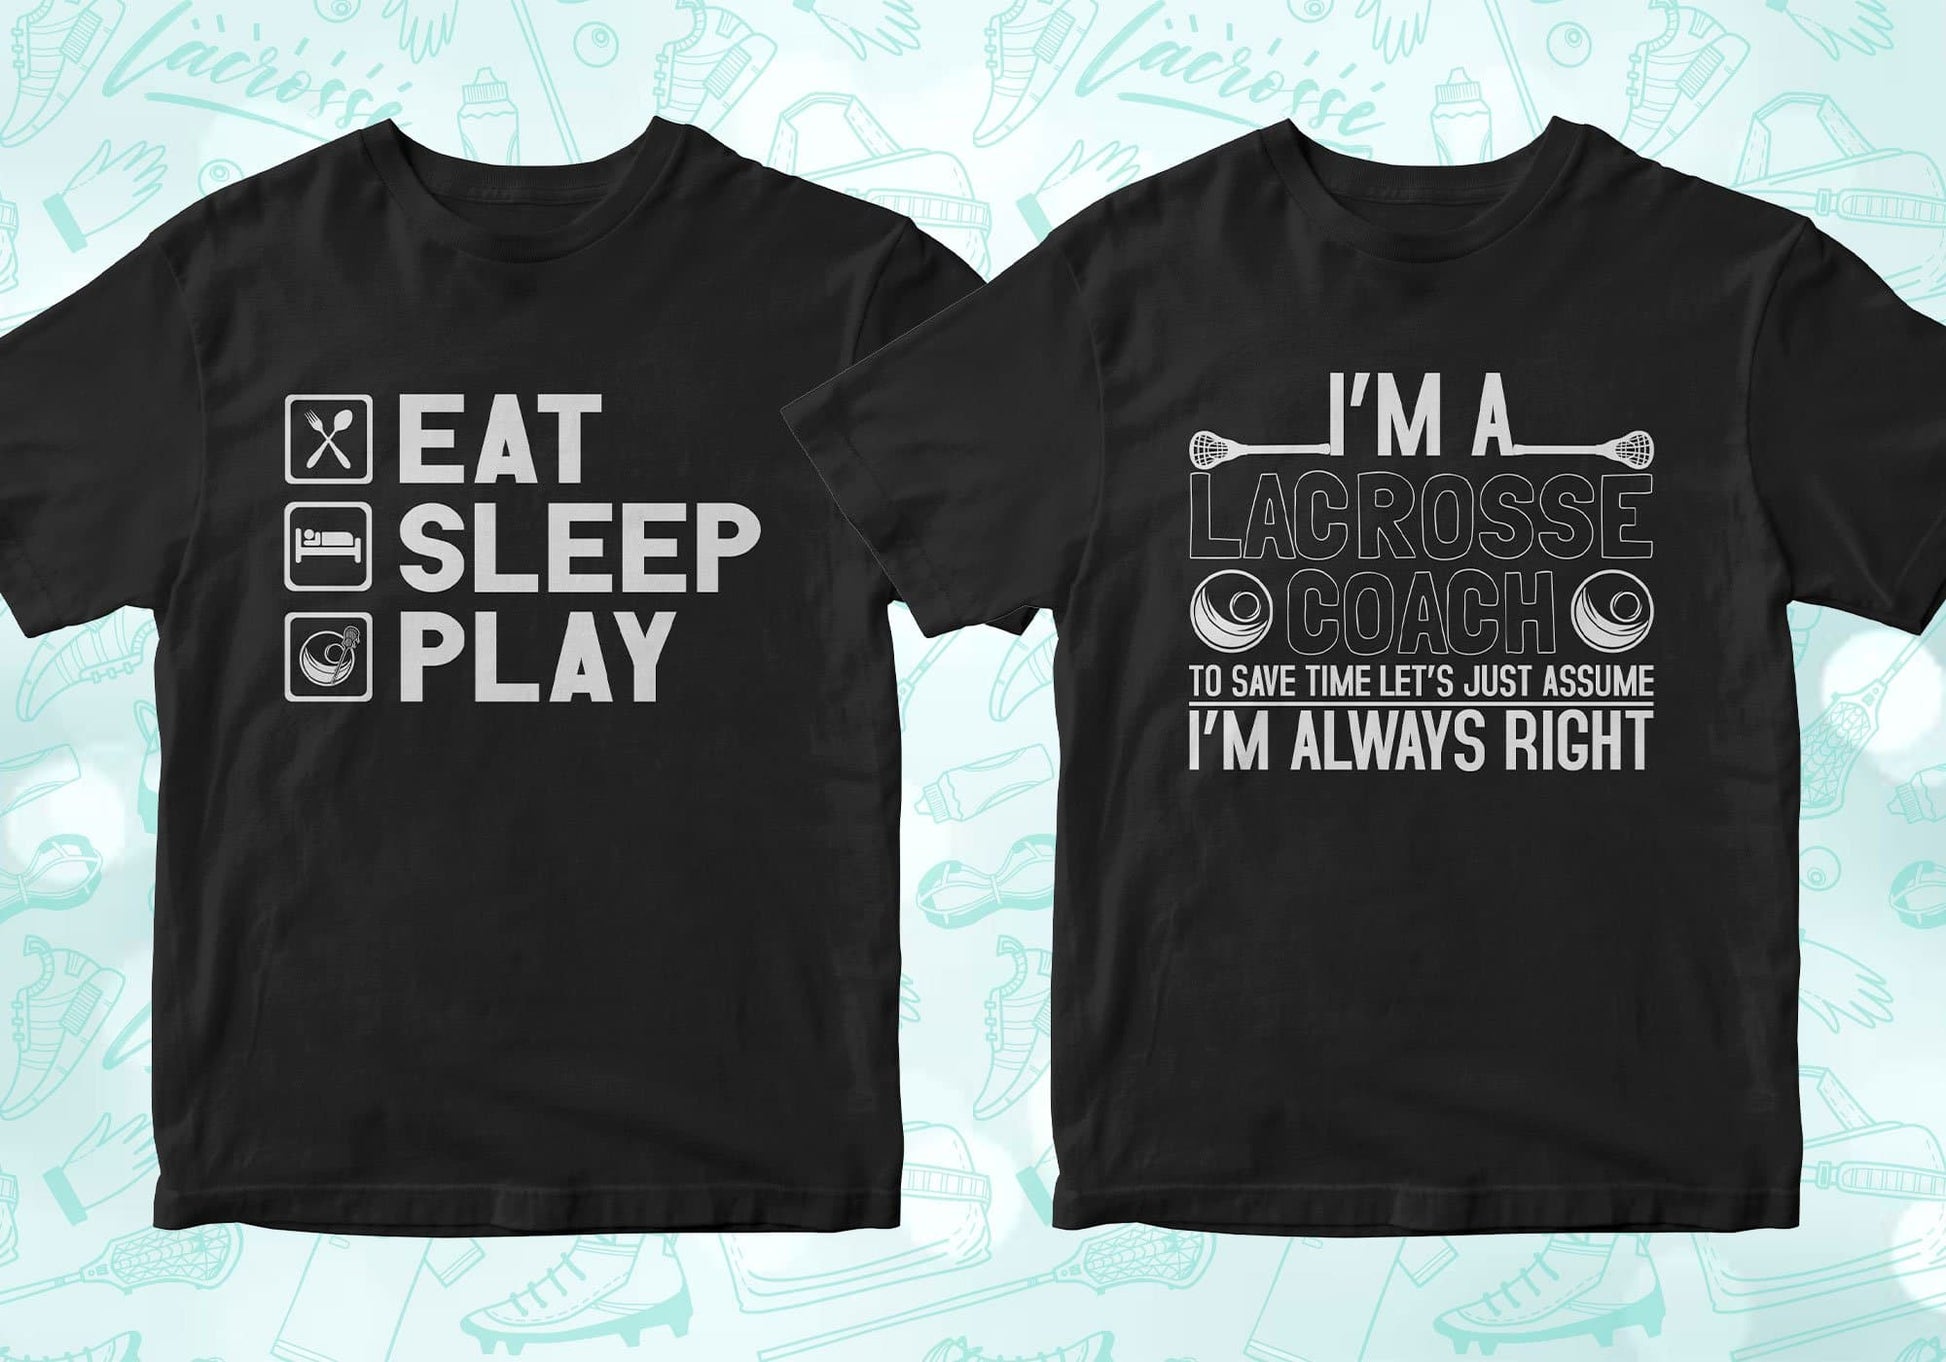 eat sleep play lacrosse, i'm a lacrosse coach to save time let's just assume i'm always right, lacrosse shirts lacrosse tshirt lacrosse t shirts lacrosse shirt designs lacrosse graphic